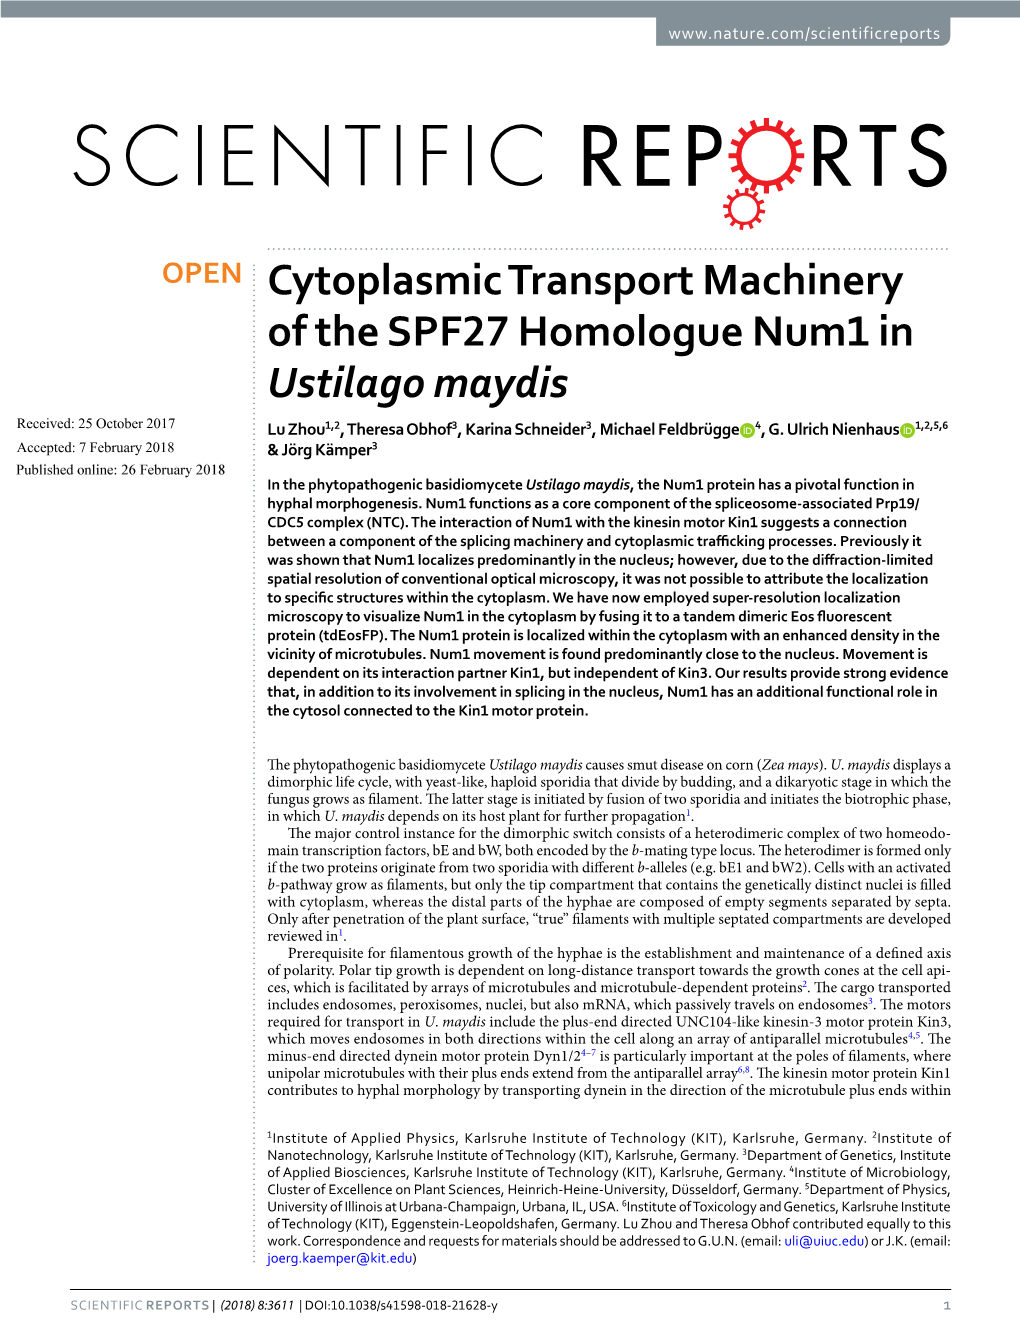 Cytoplasmic Transport Machinery of the SPF27 Homologue Num1 In